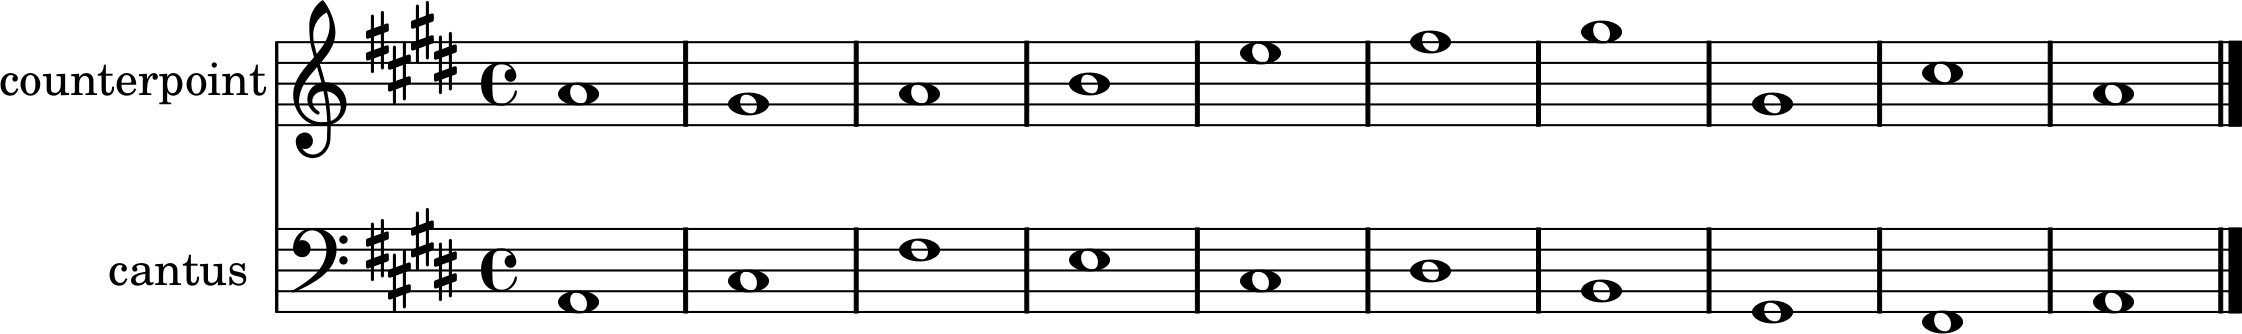 A counterpoint in the soprano to the given cantus